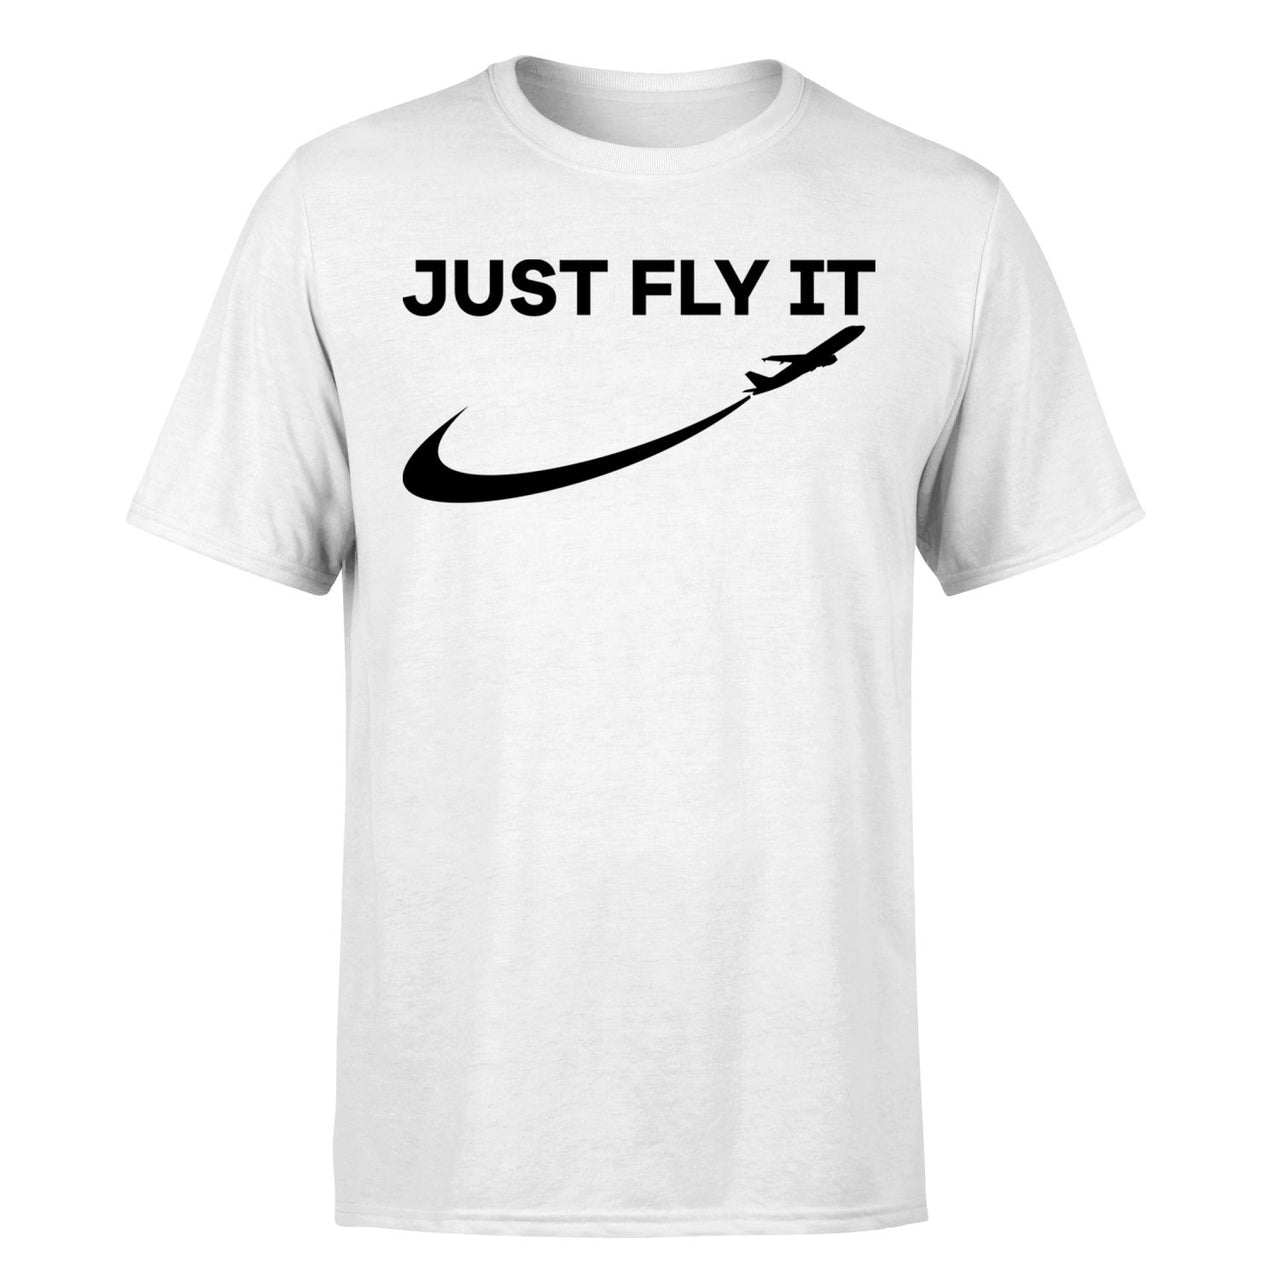 Just Fly It 2 Designed T-Shirts